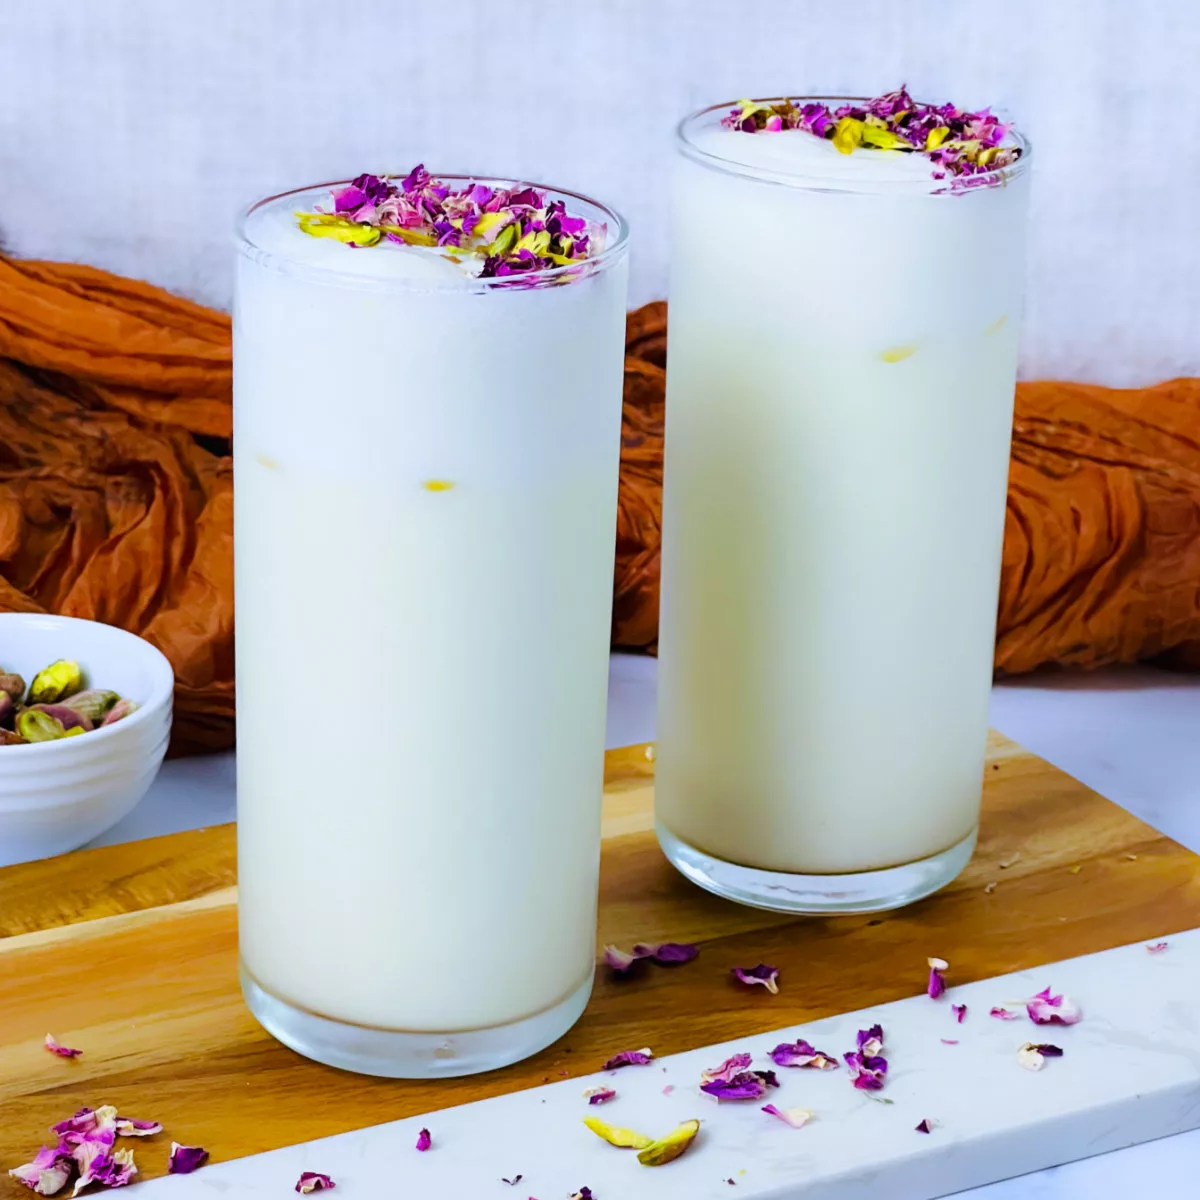 Tall glasses of lassi placed on a marble surface.